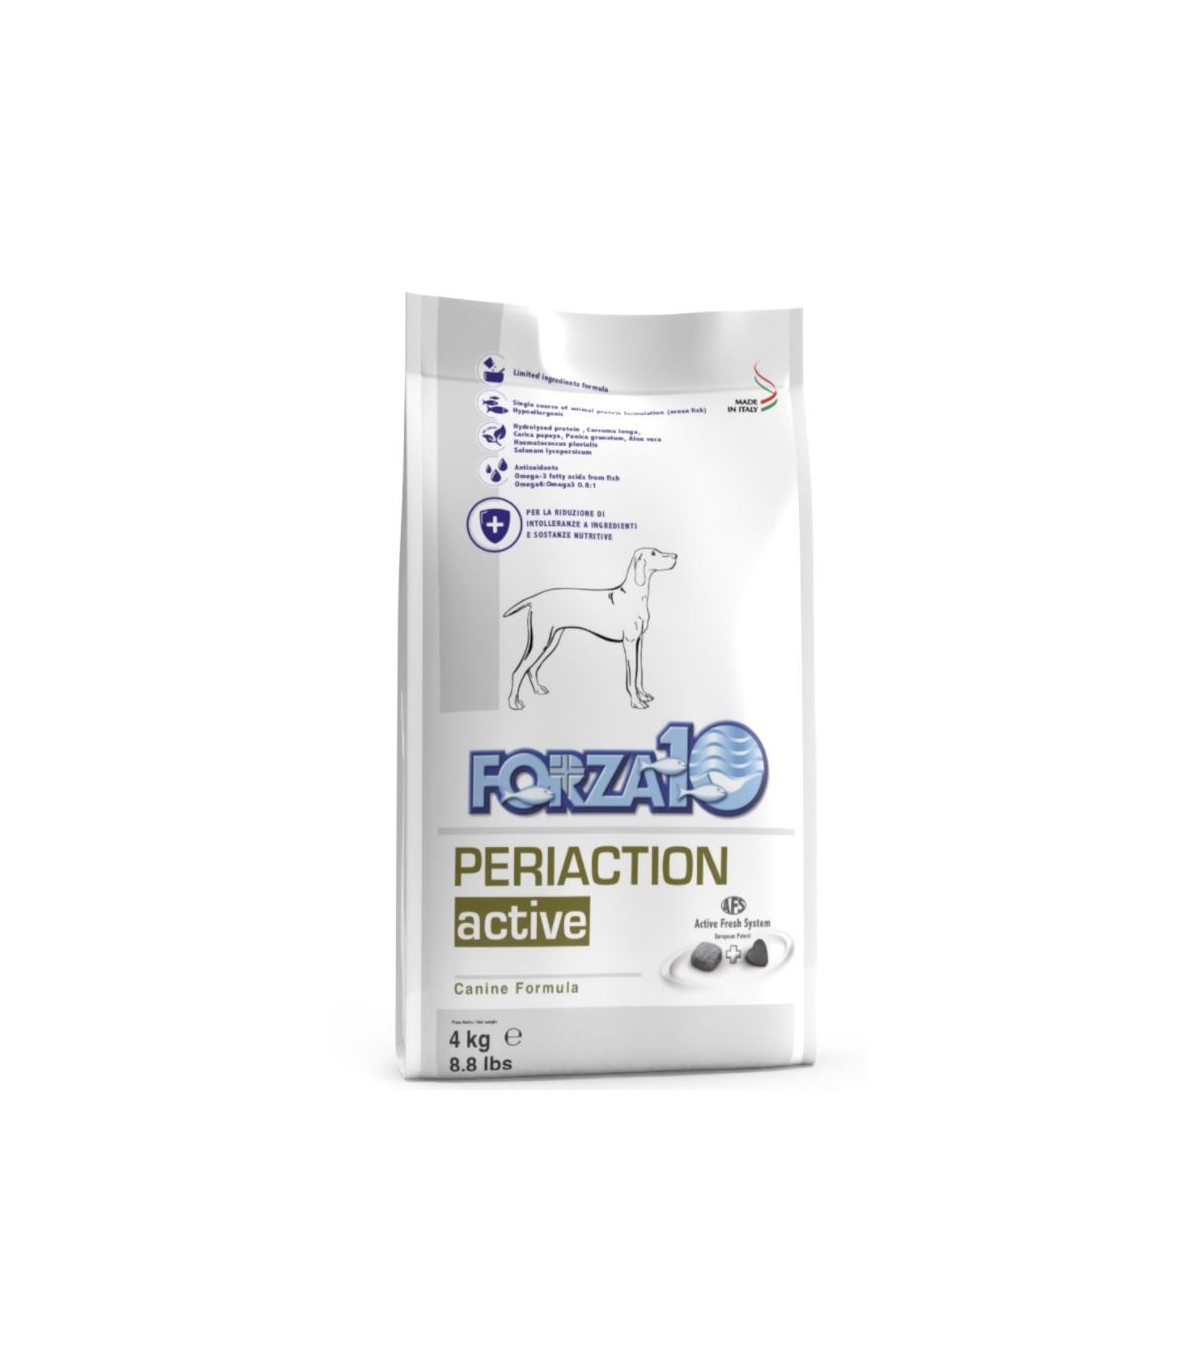 Forza10 active 4kg periaction